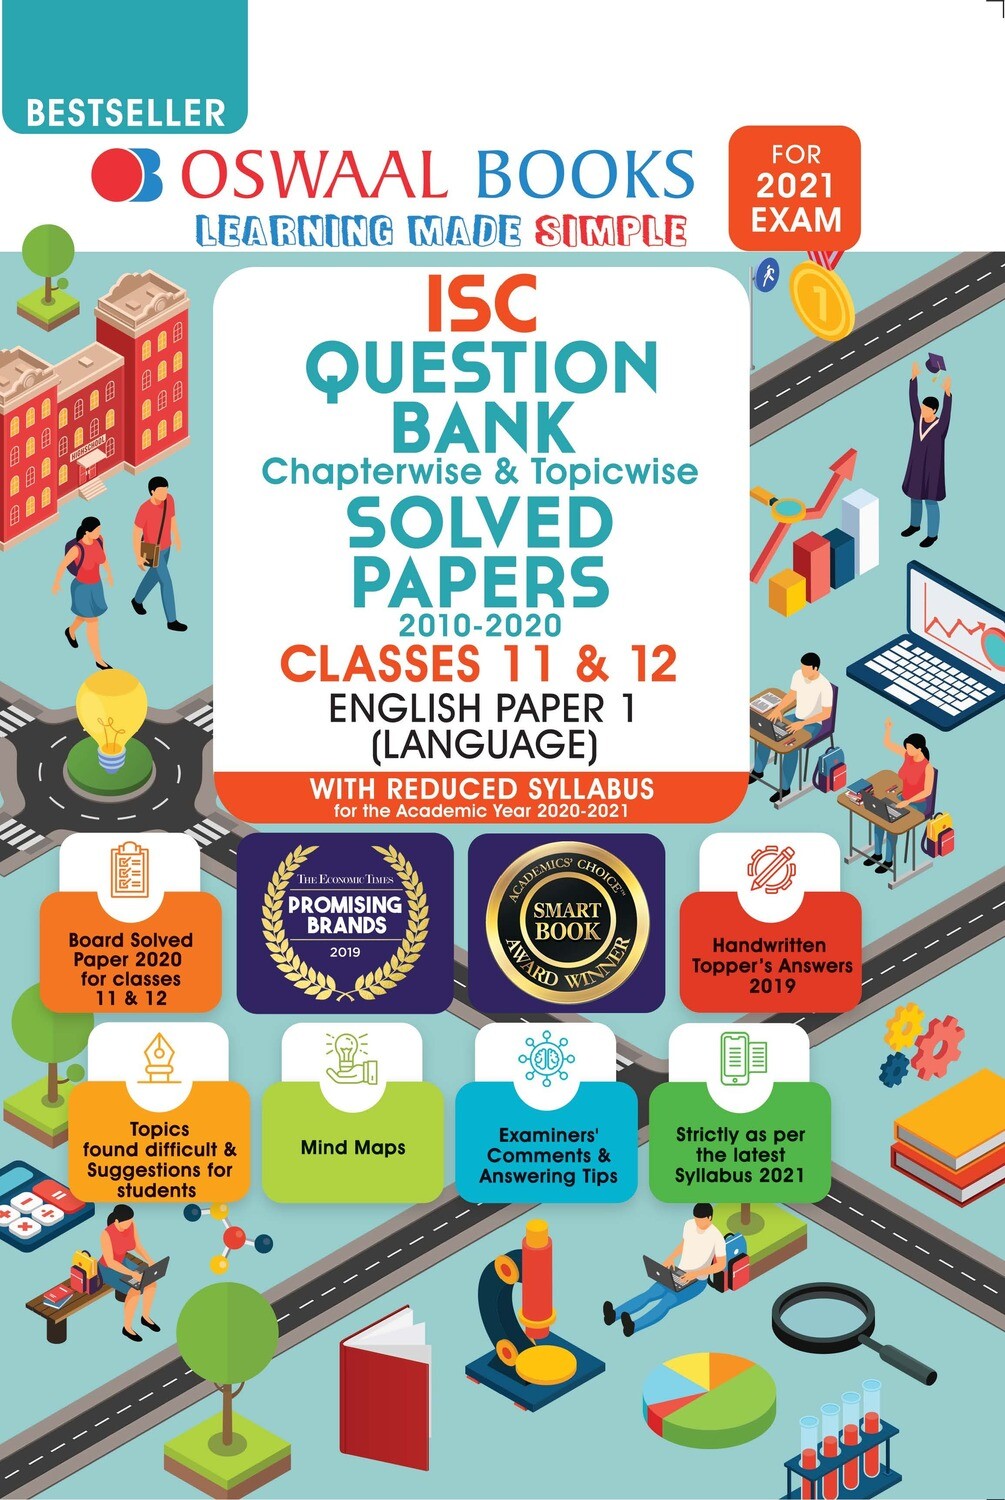 Buy e-book: Oswaal ISC Question Bank Chapterwise & Topicwise Solved Papers, English Paper - 1, Class 12 (Reduced